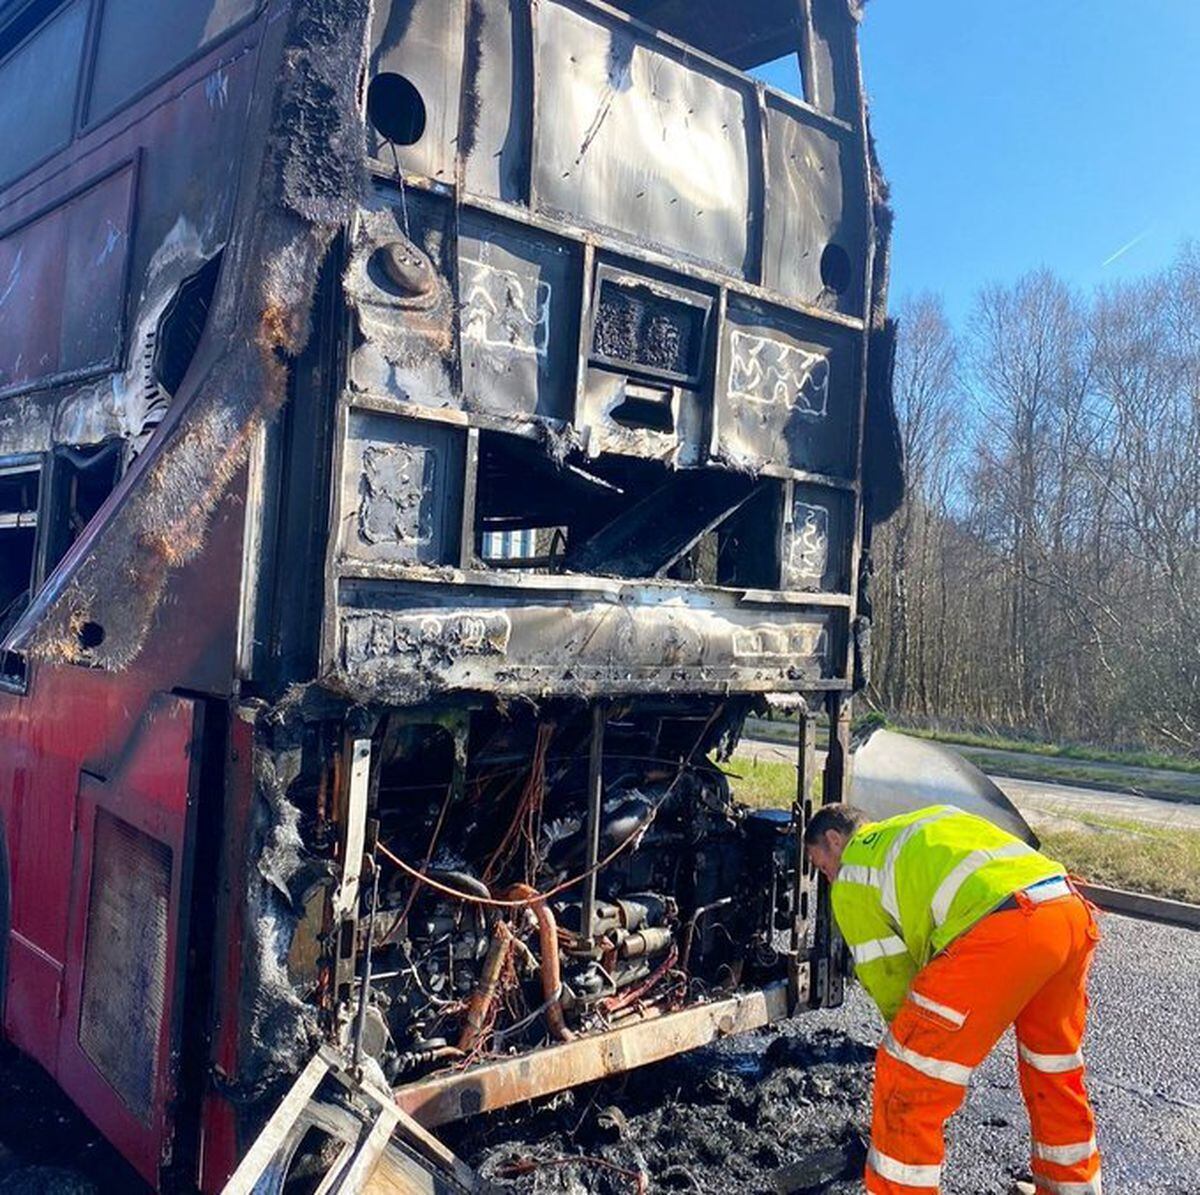 Bus gutted by fire 